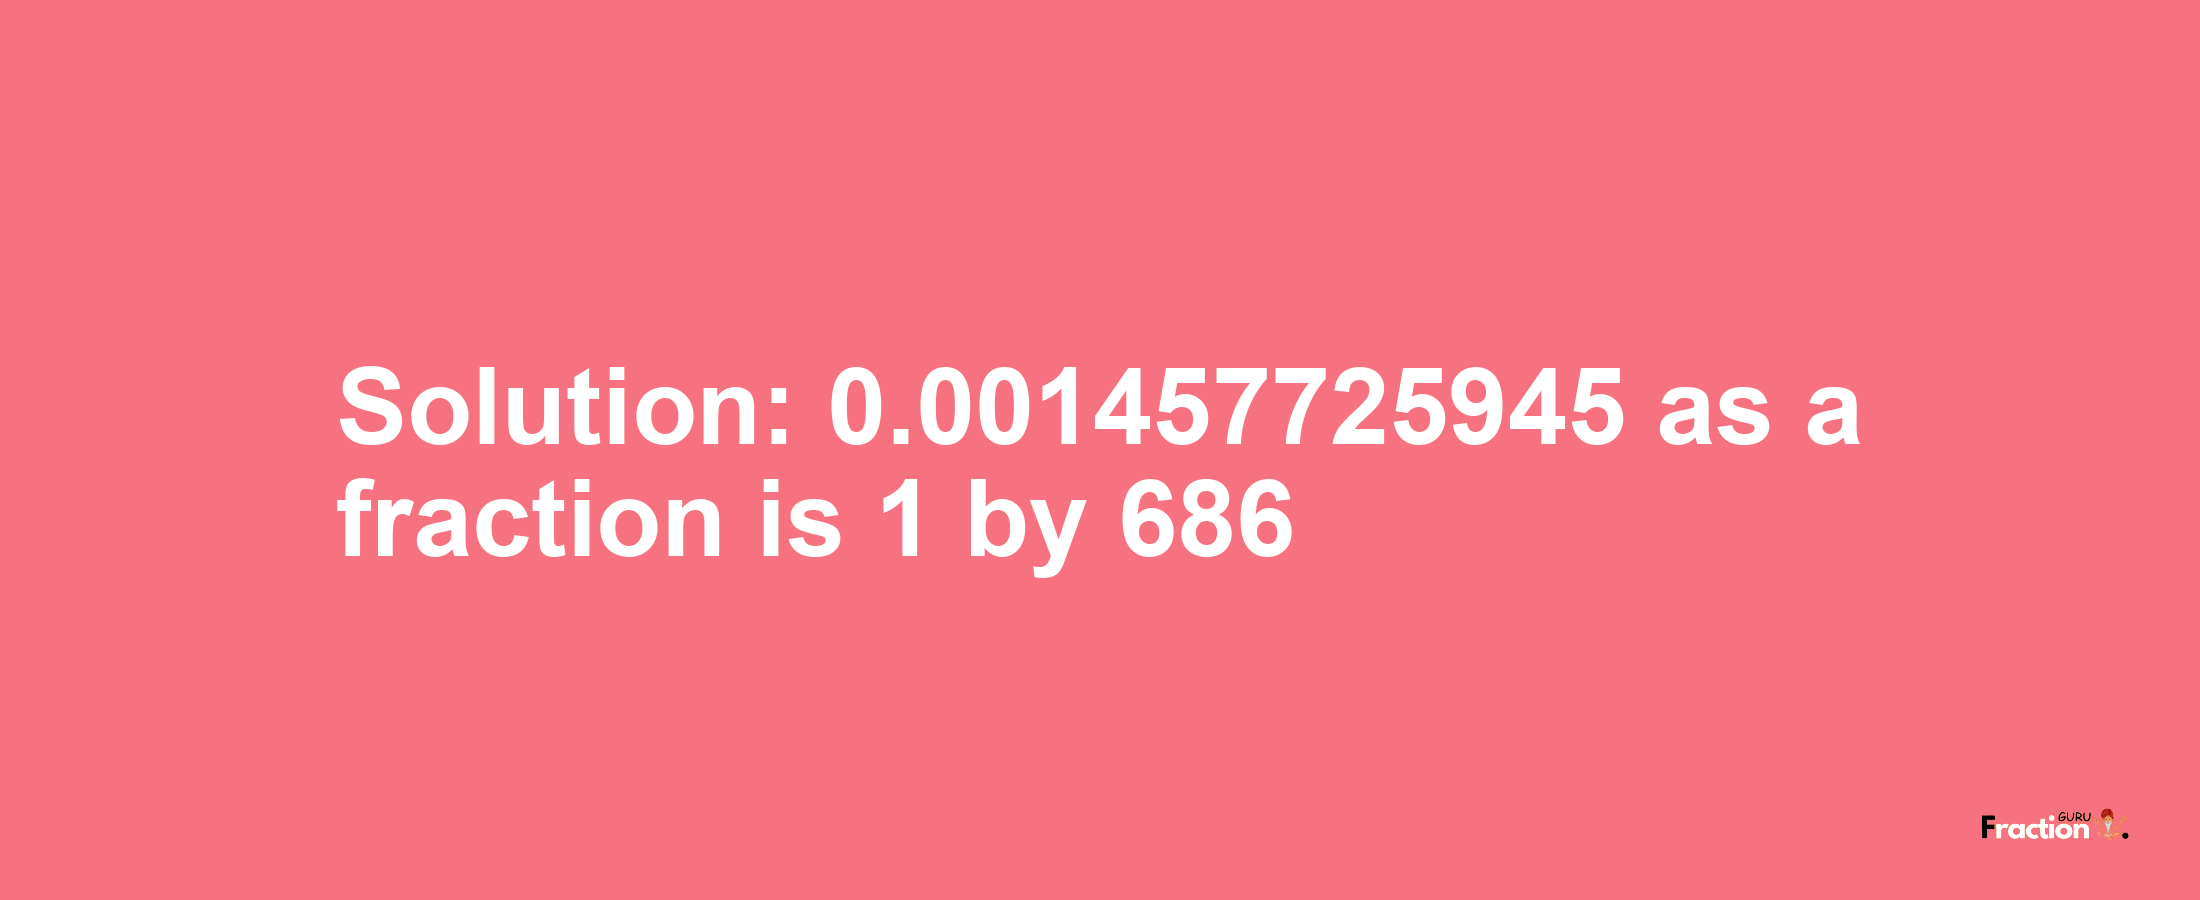 Solution:0.001457725945 as a fraction is 1/686